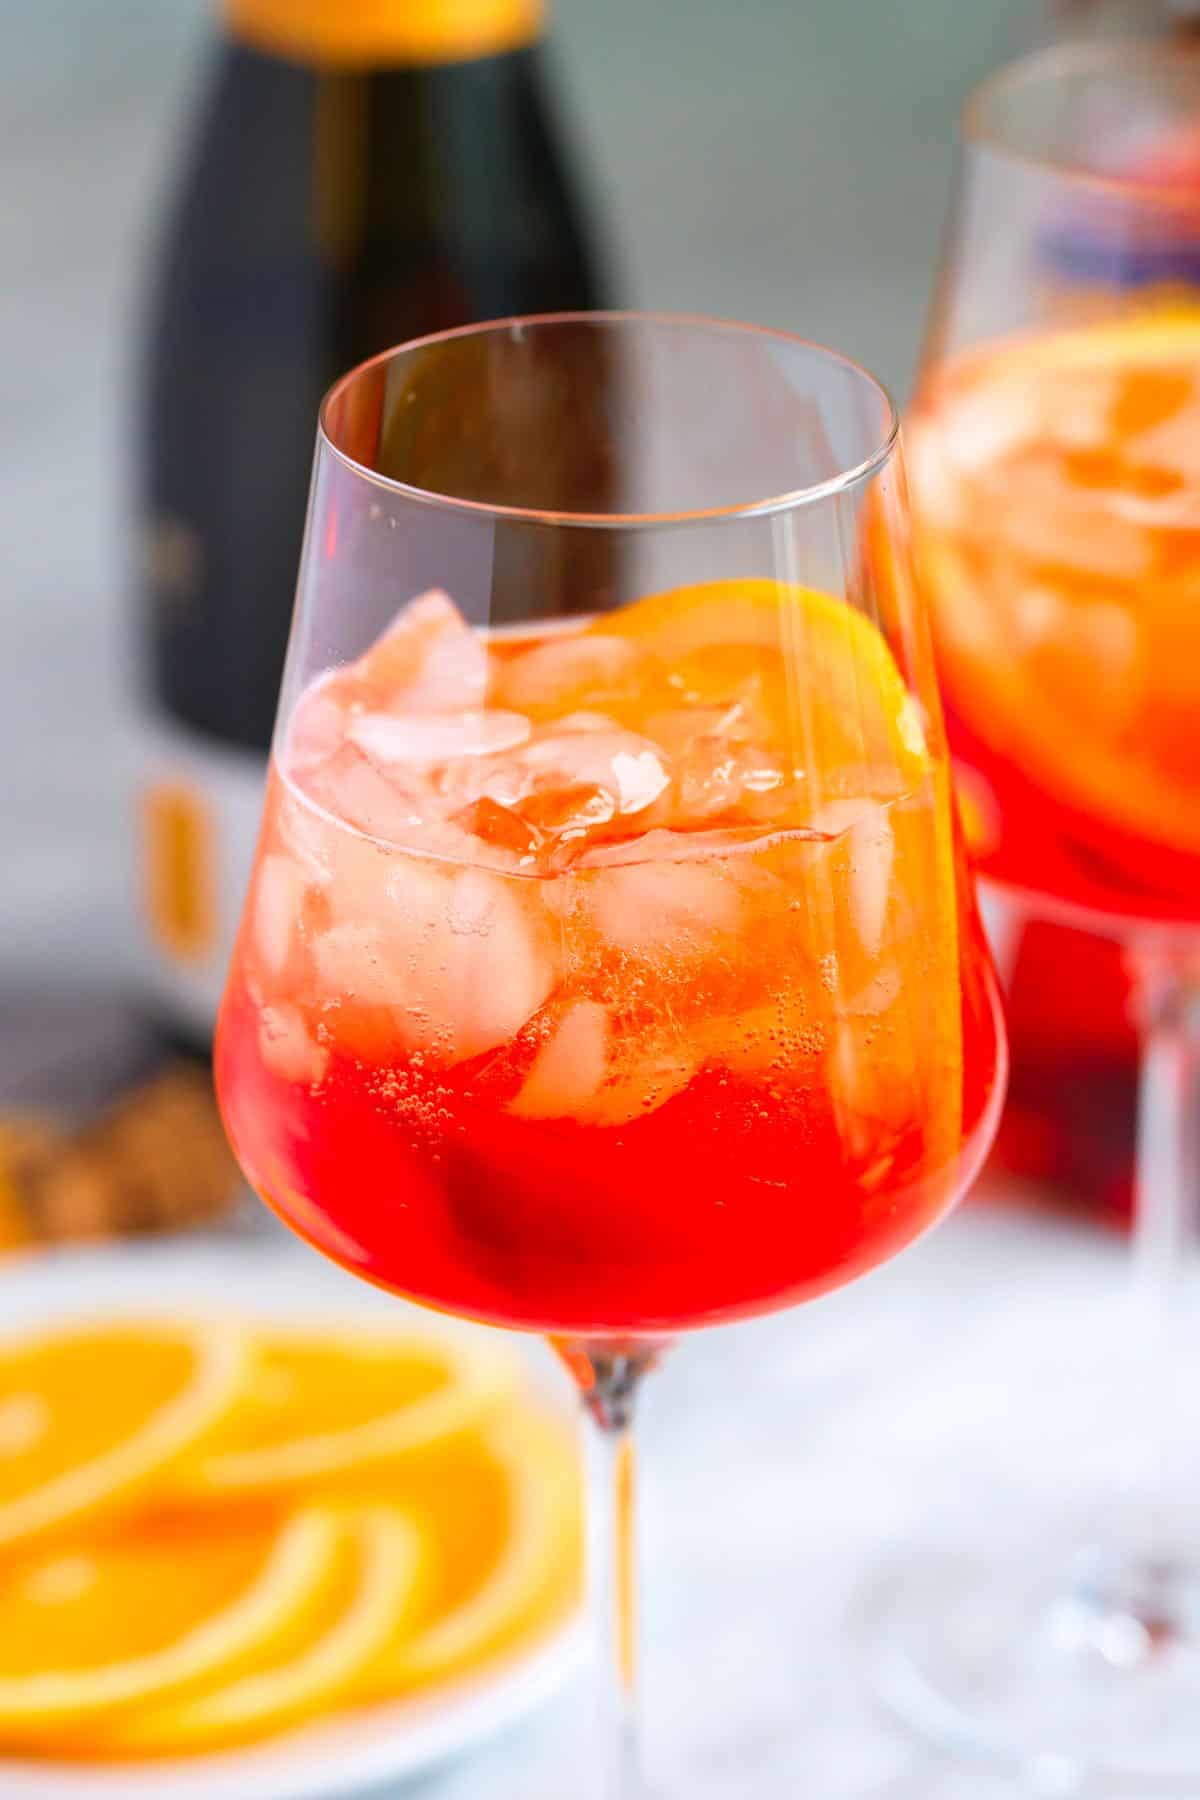 How to Make the Best Aperol Spritz